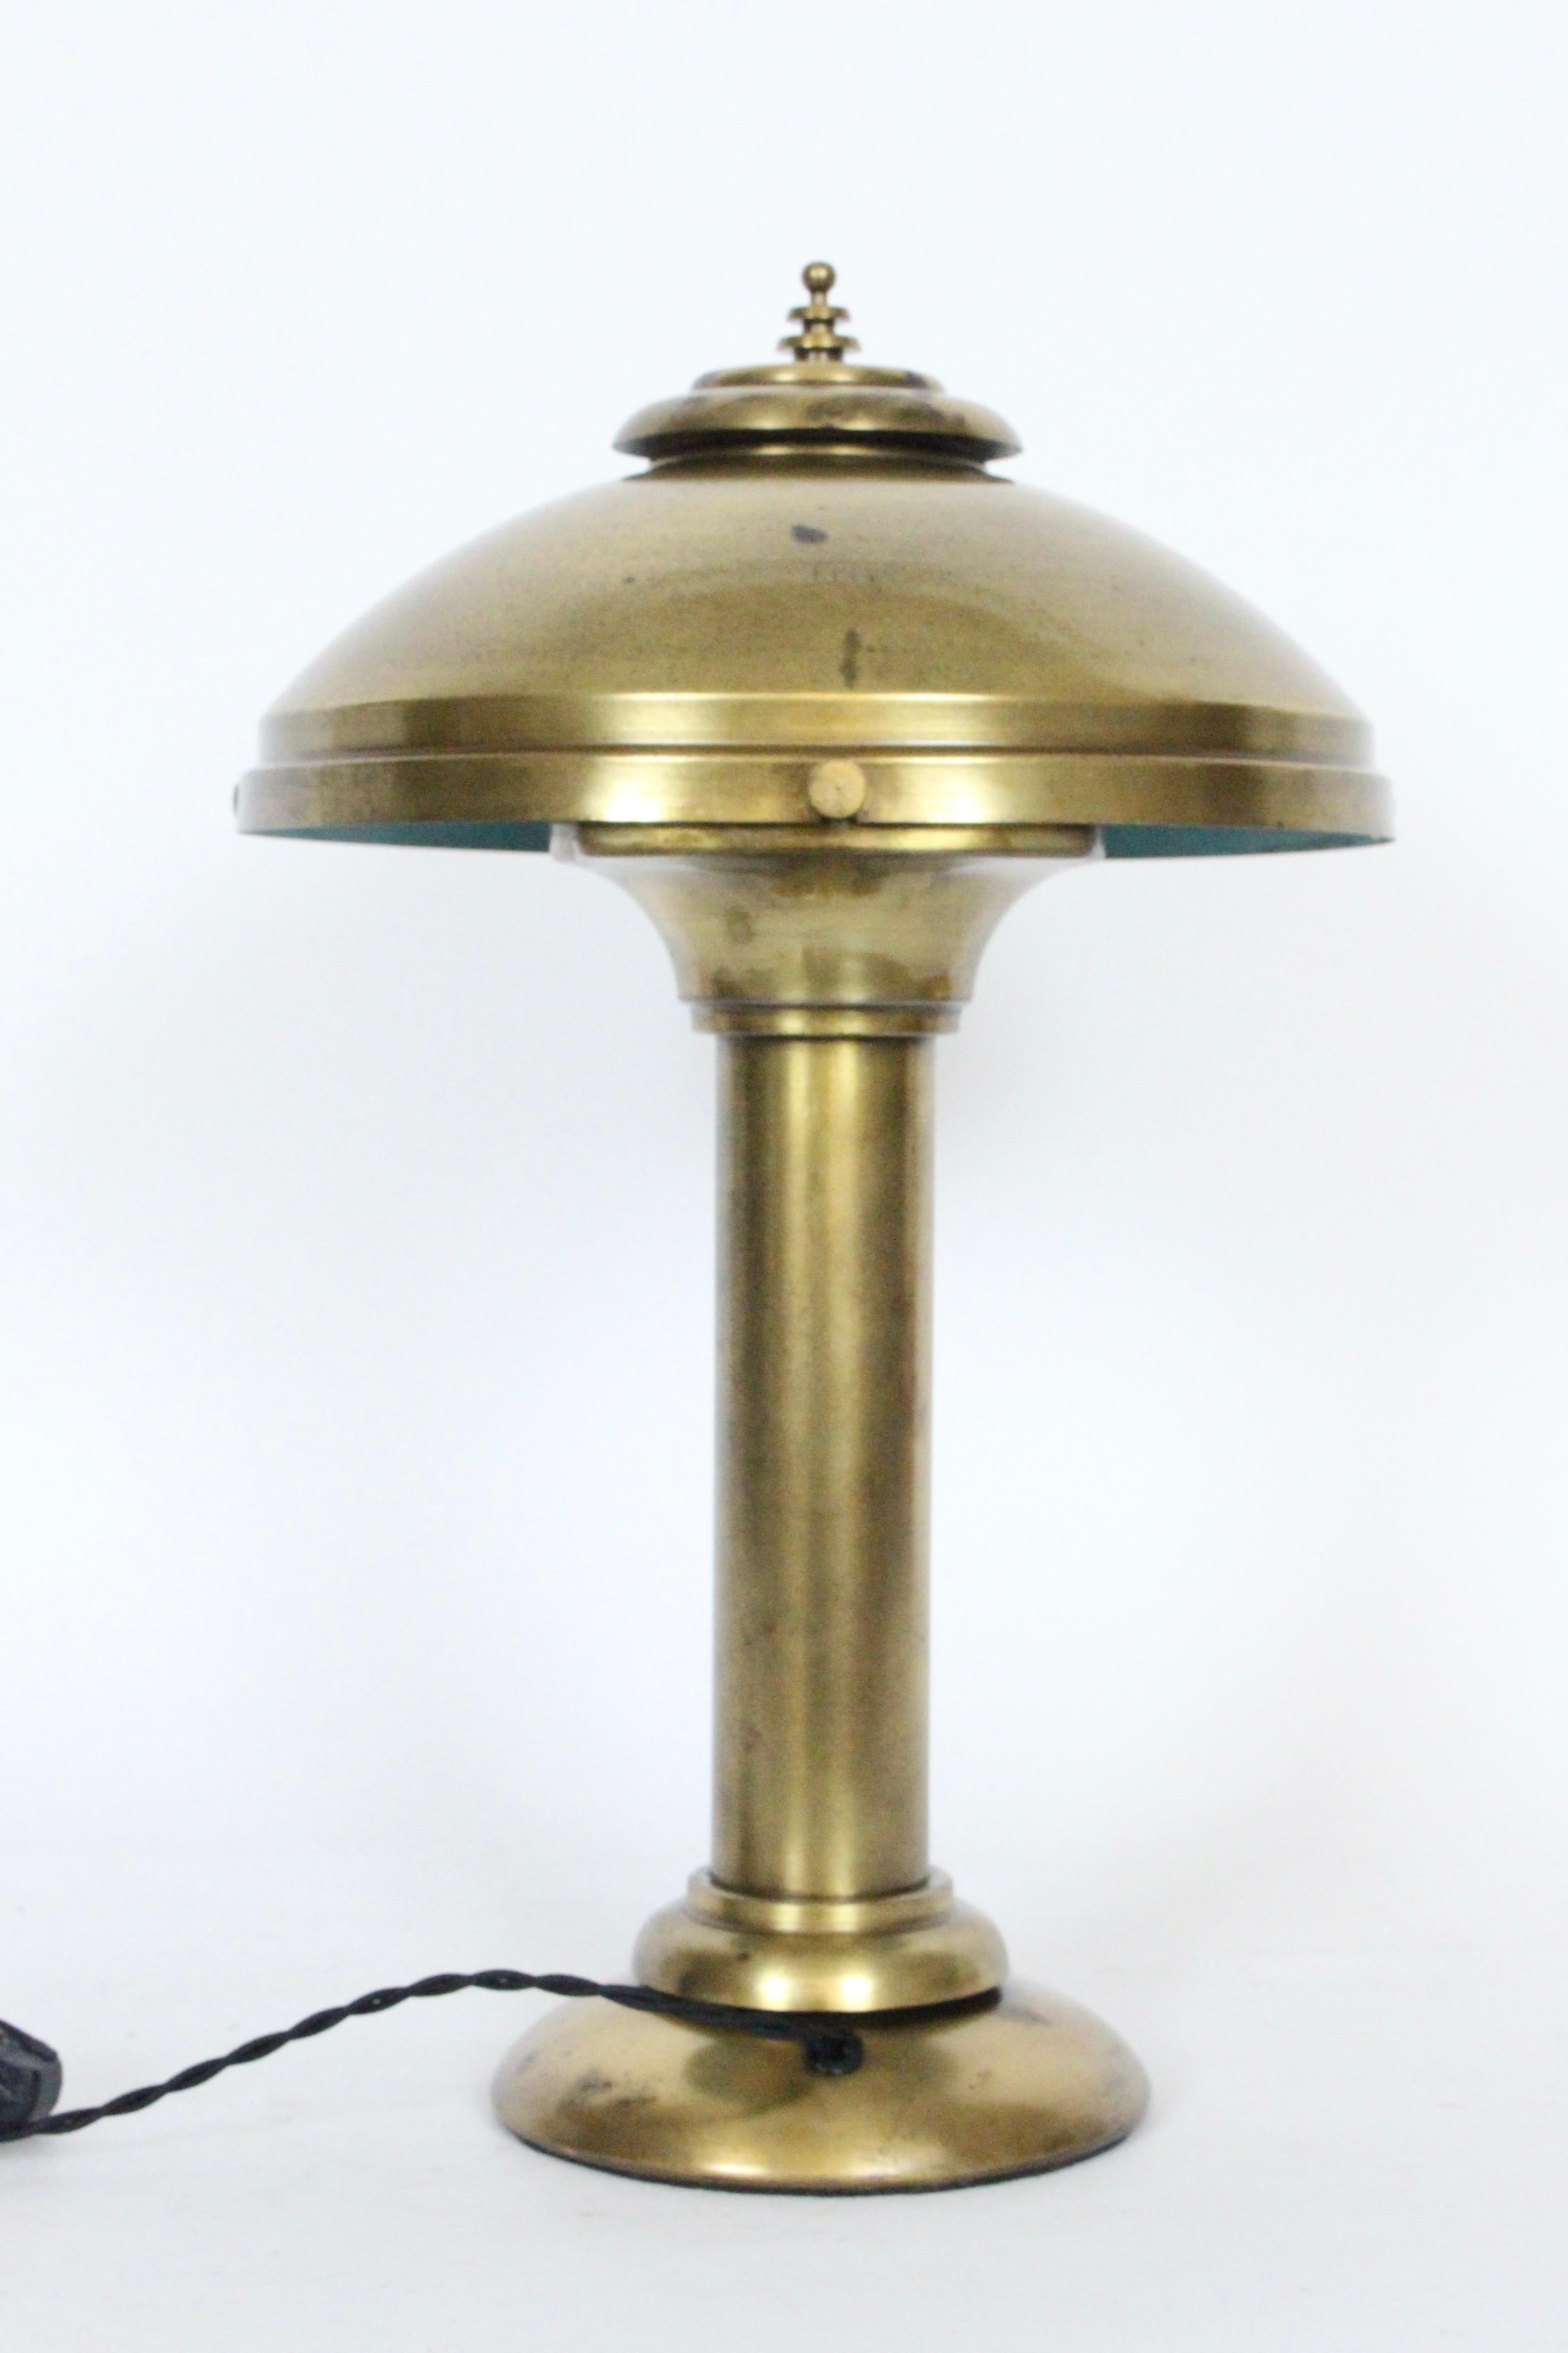 American Fairies Mfg. Co. Brass Cantilever Desk Lamp, 1920s For Sale